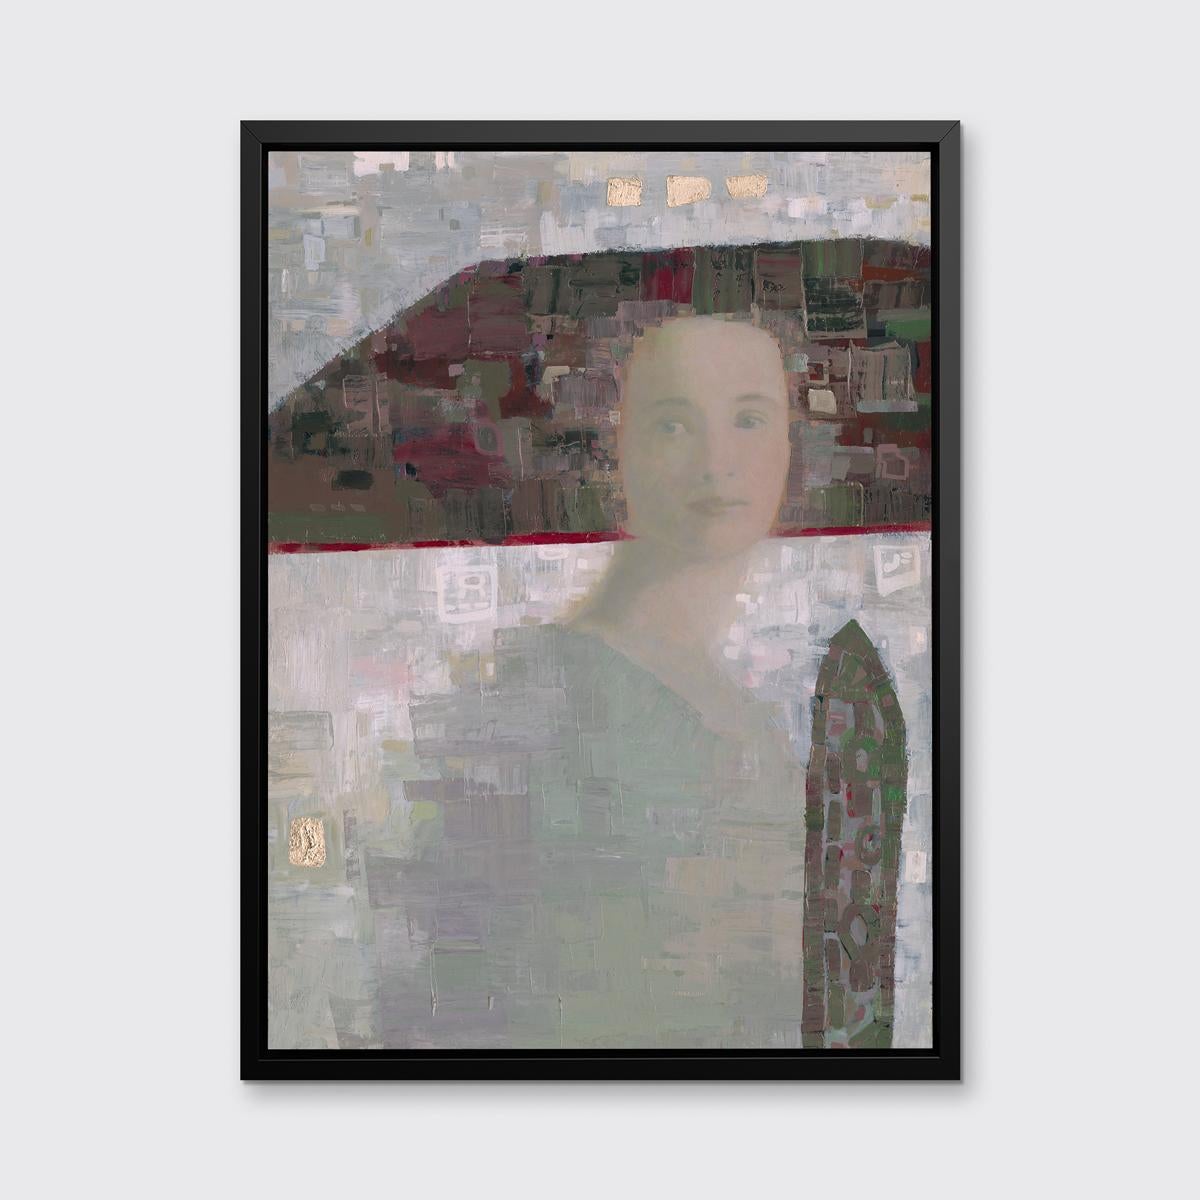 This abstract portrait limited edition print by Ned Martin blends the artist's signature abstract style with portraiture that is reminiscent of the Old Masters. The softly-executed realistic face and neck of the woman in this painting is contrasted